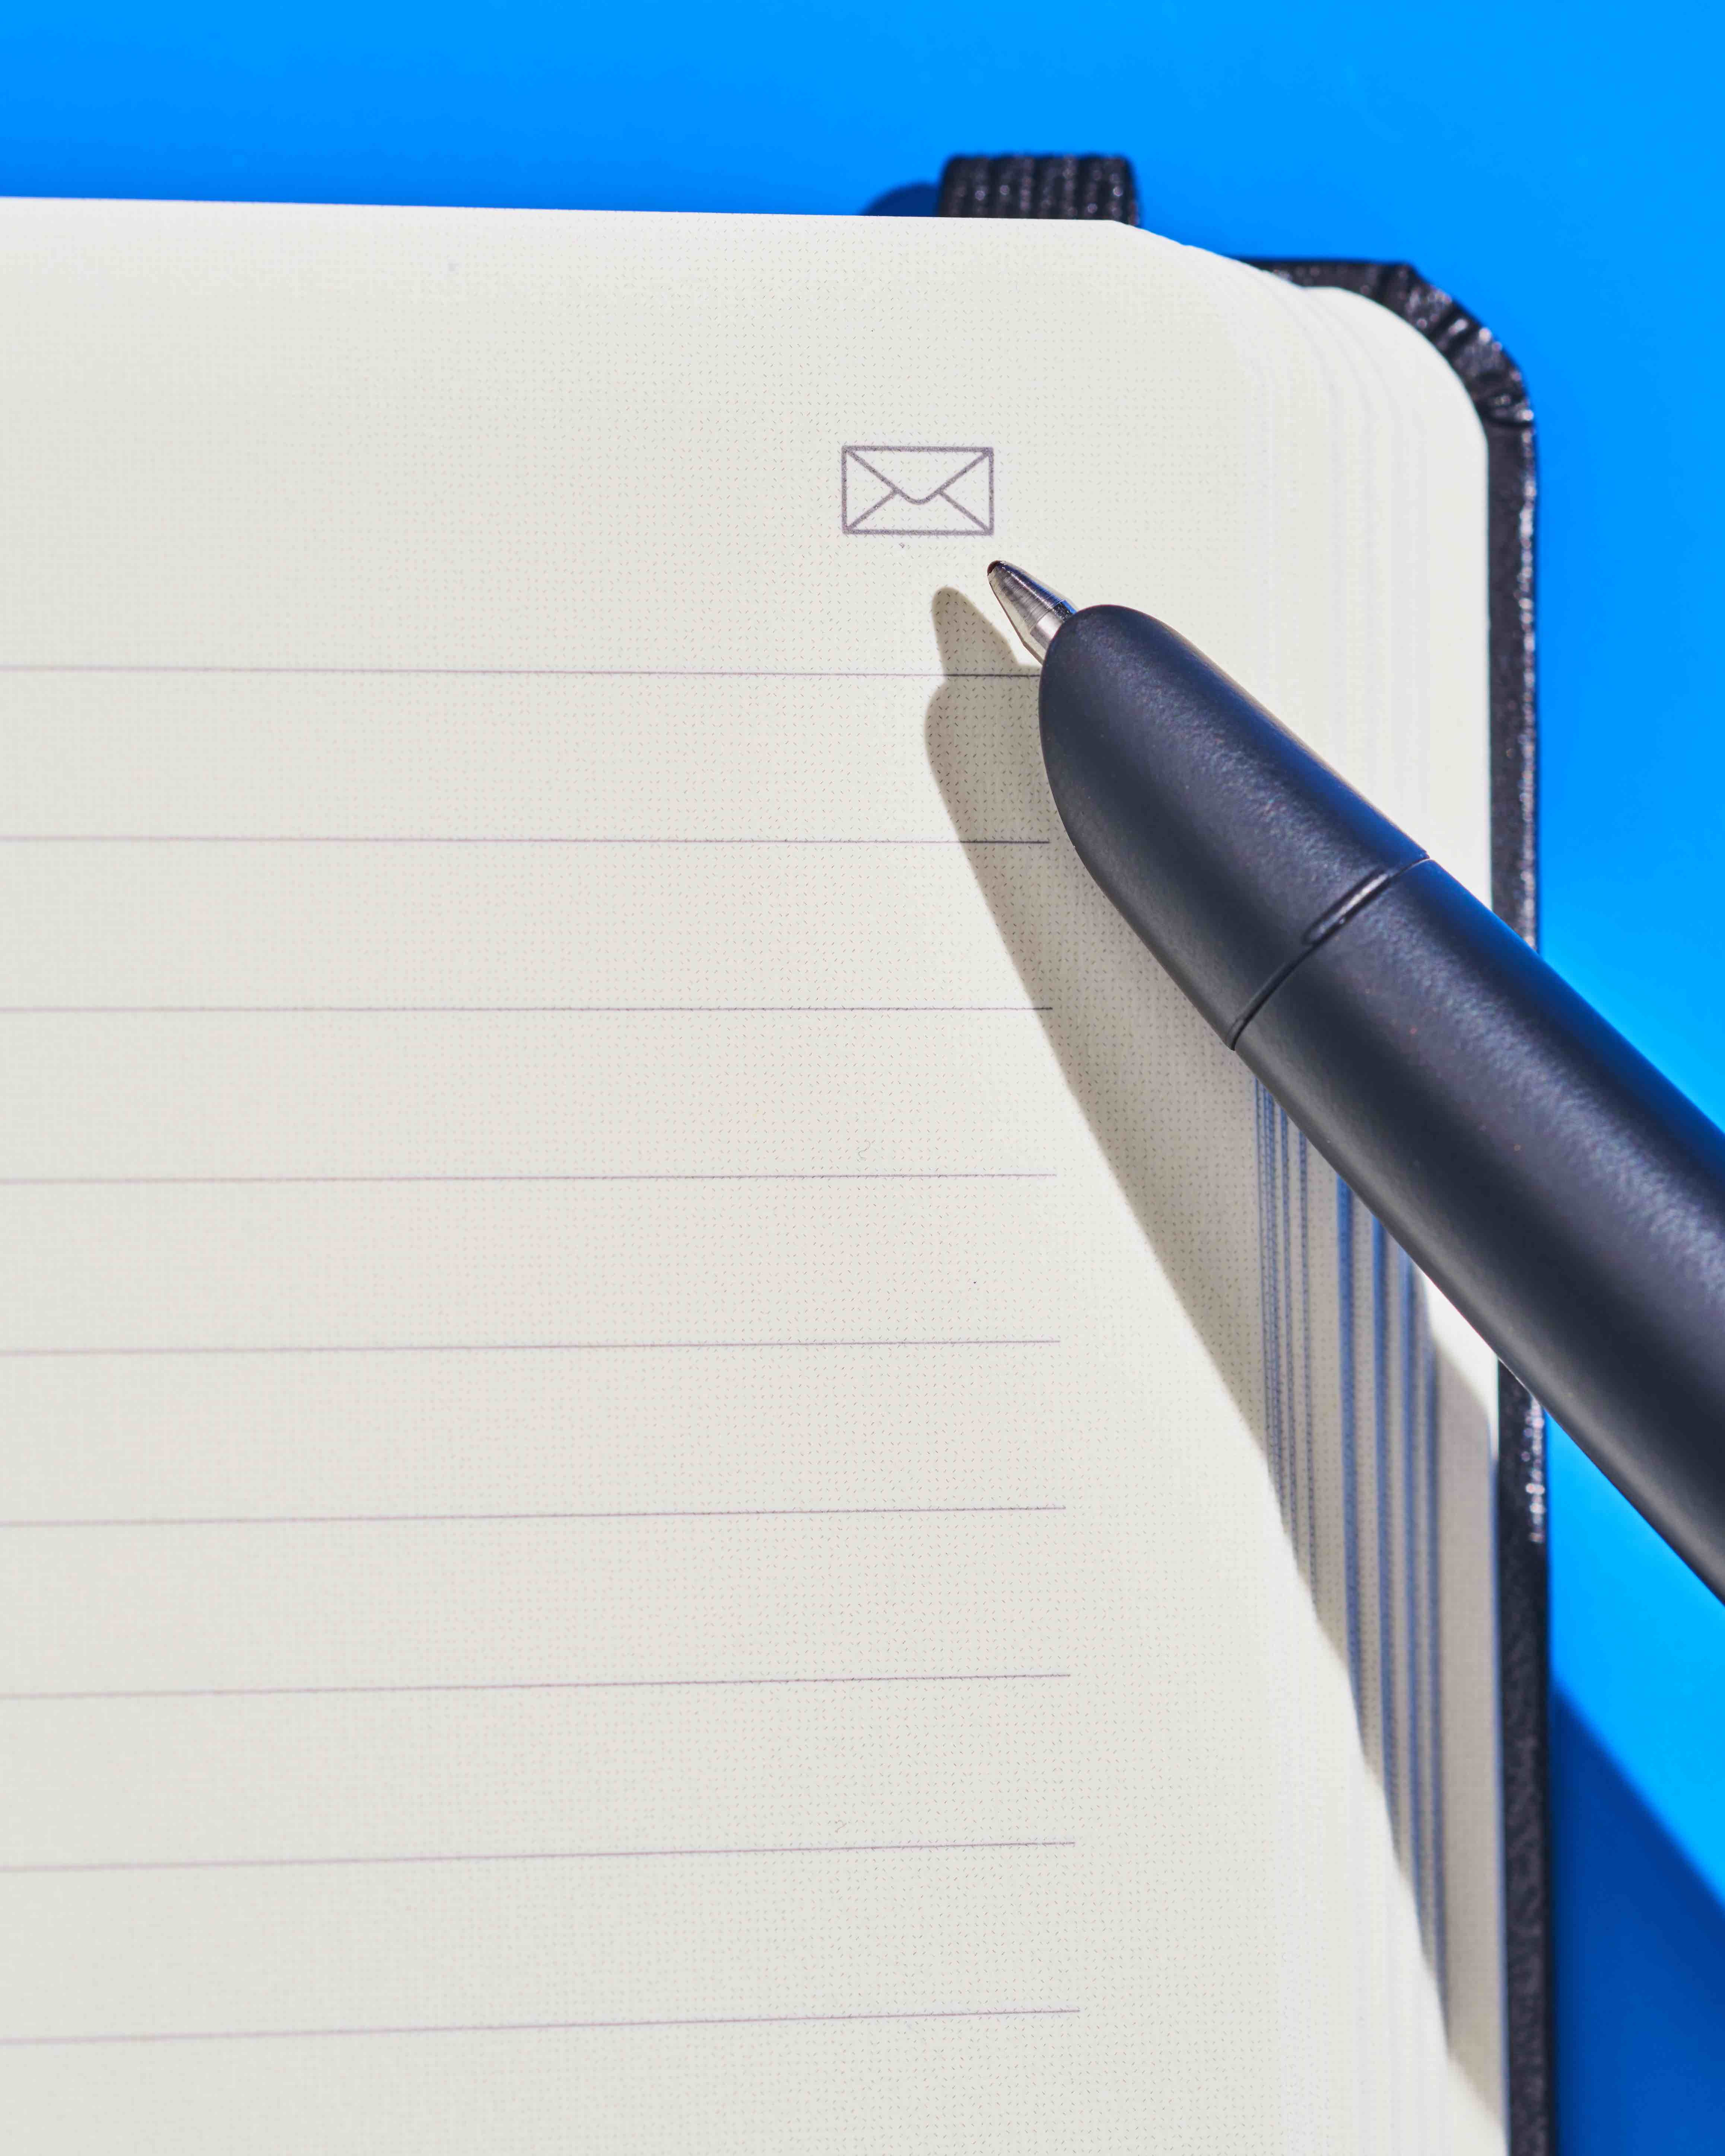 Moleskine's smart notebook will work with Microsoft Office